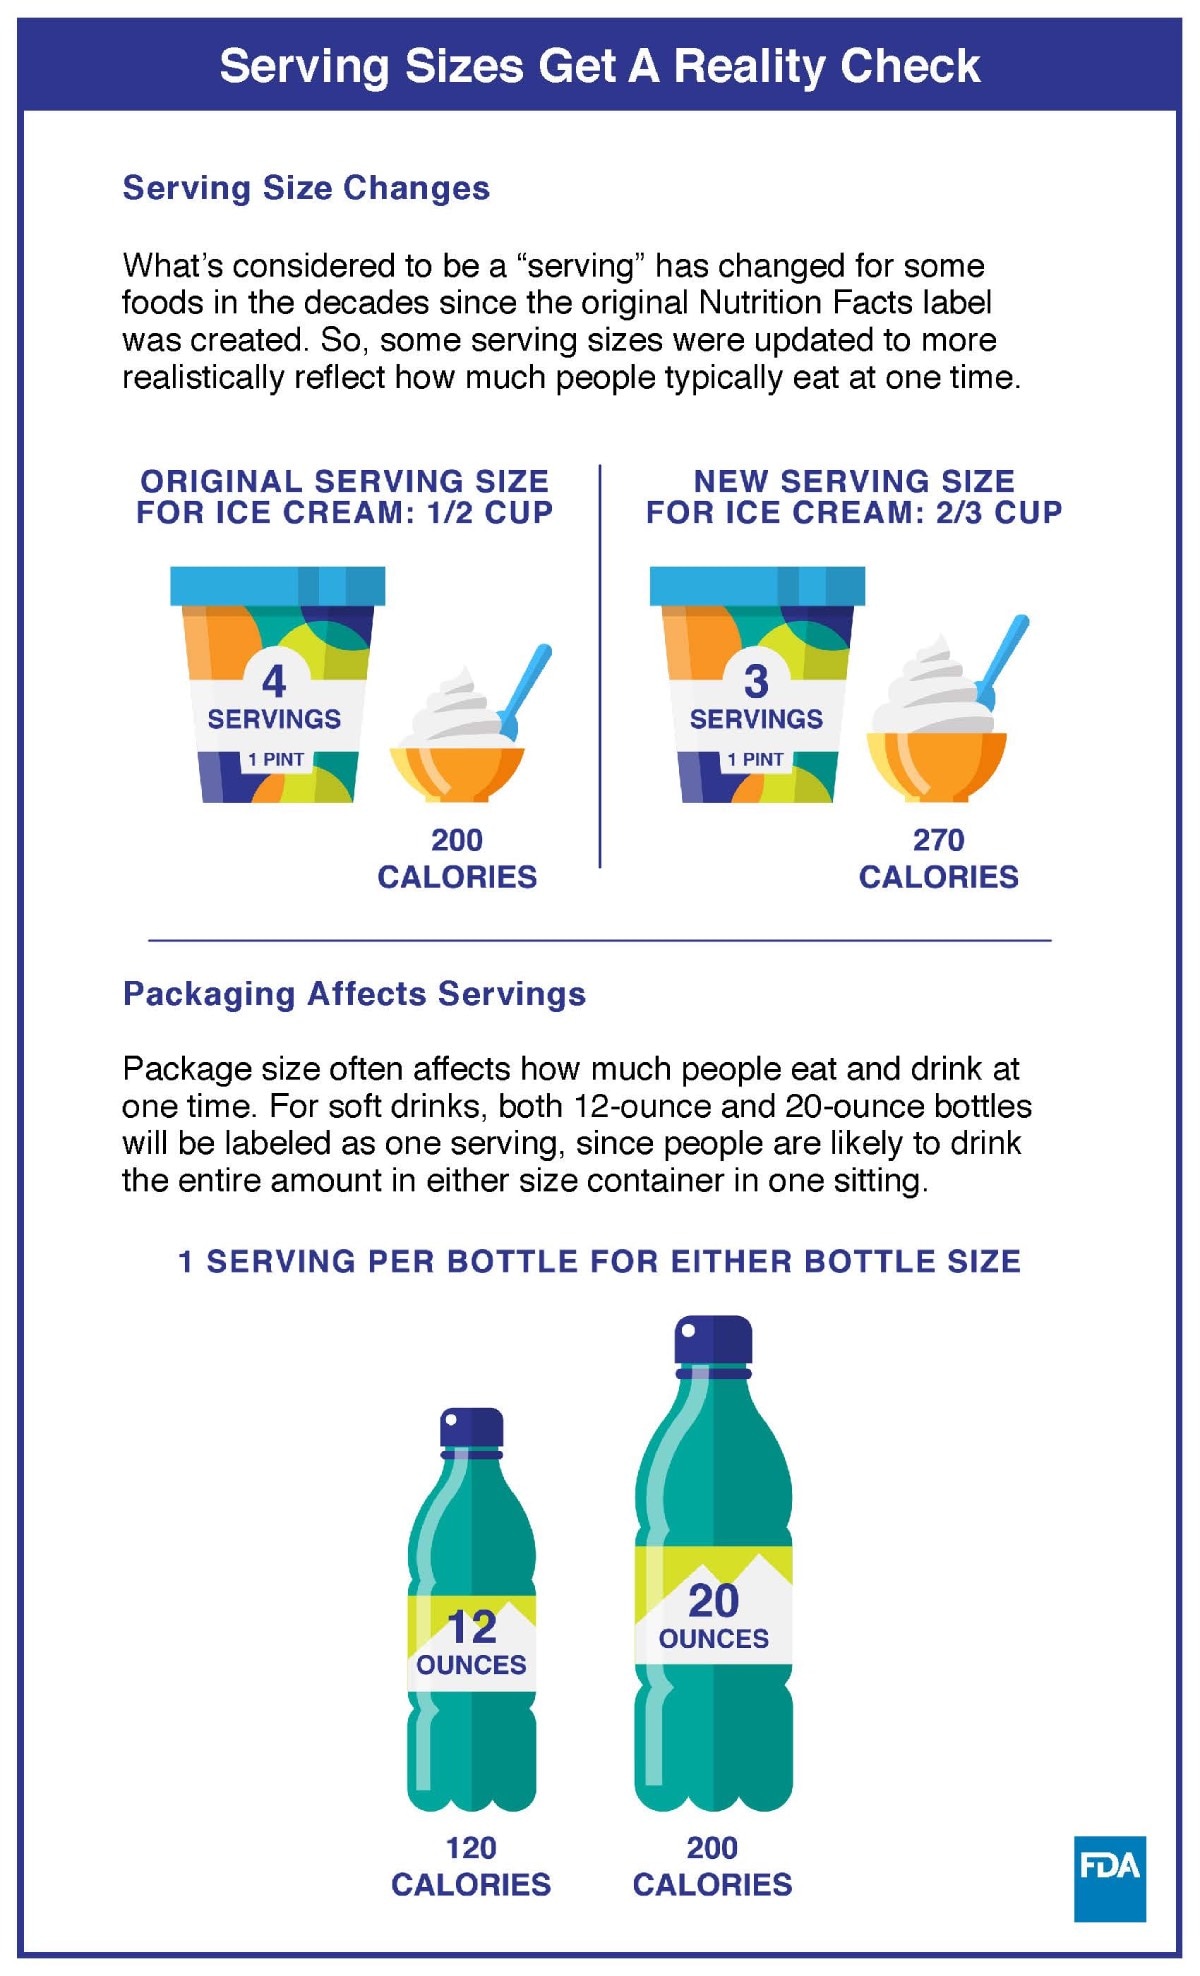 Graphic comparing old and new serving sizes for ice cream containers and soda bottles.